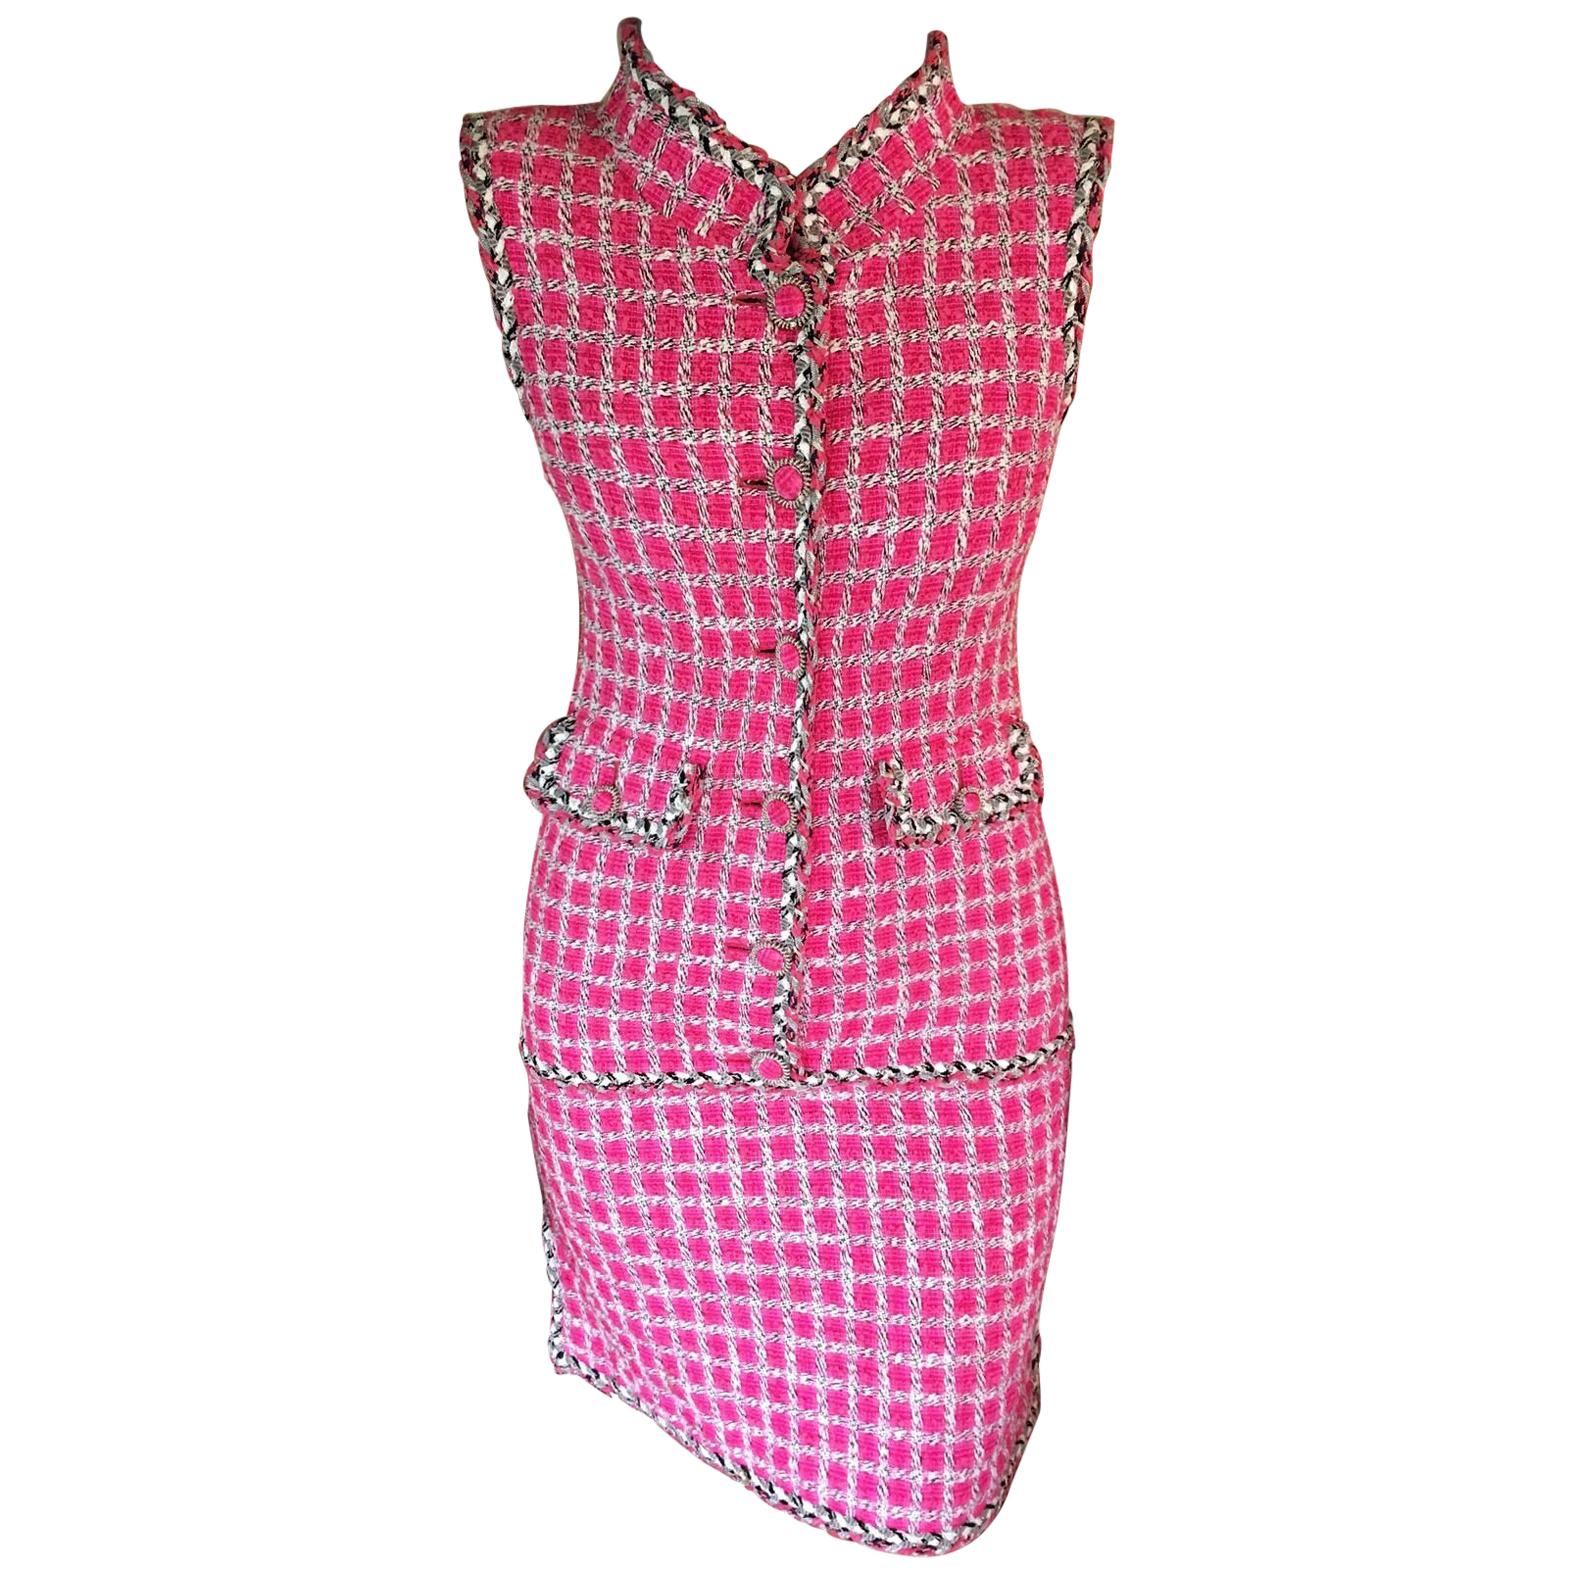 HOT* Chanel Peach Tweed Belted Mini Dress with CC Buttons FR 34 (UK 4 –  Sellier